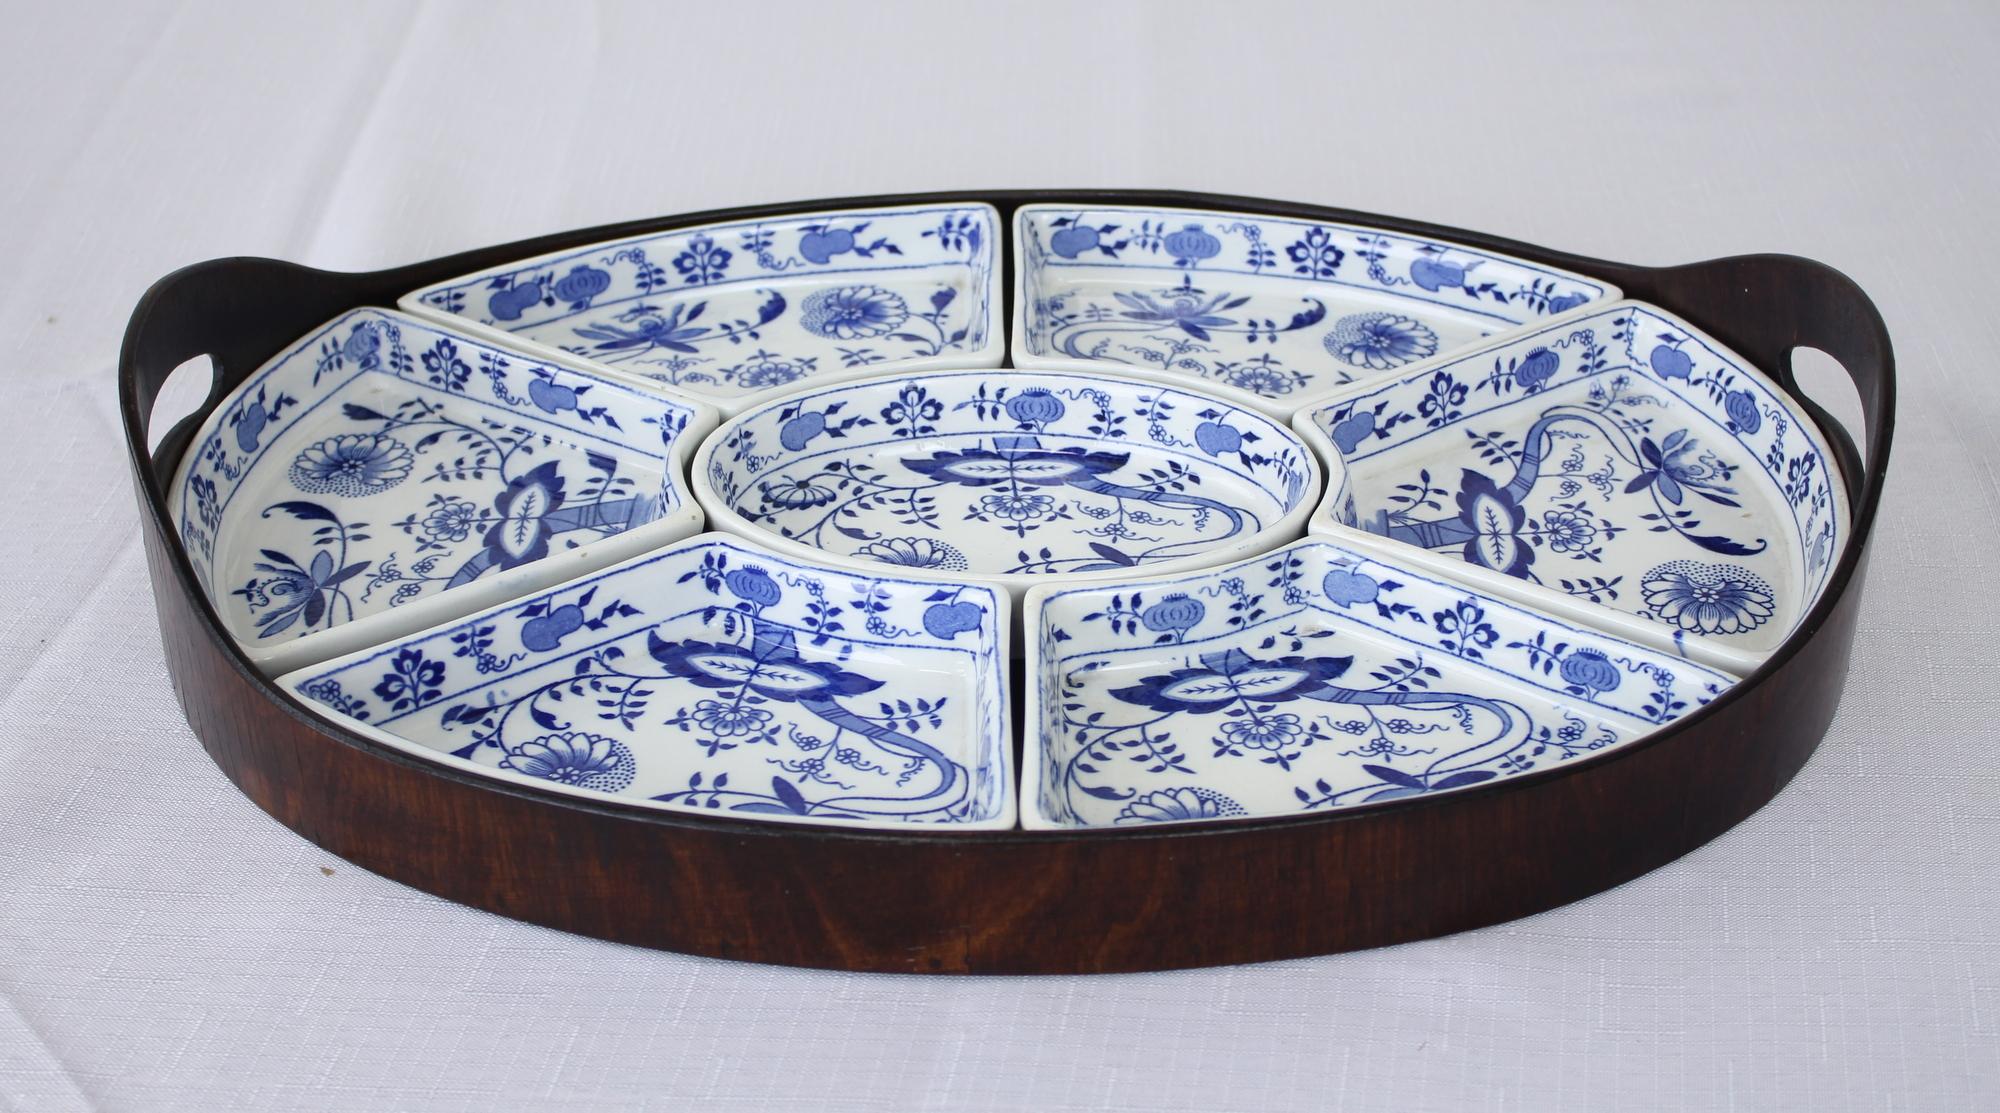 A seven piece hors d'oeuvres dishes and tray from the renowned English pottery company Booths in their 